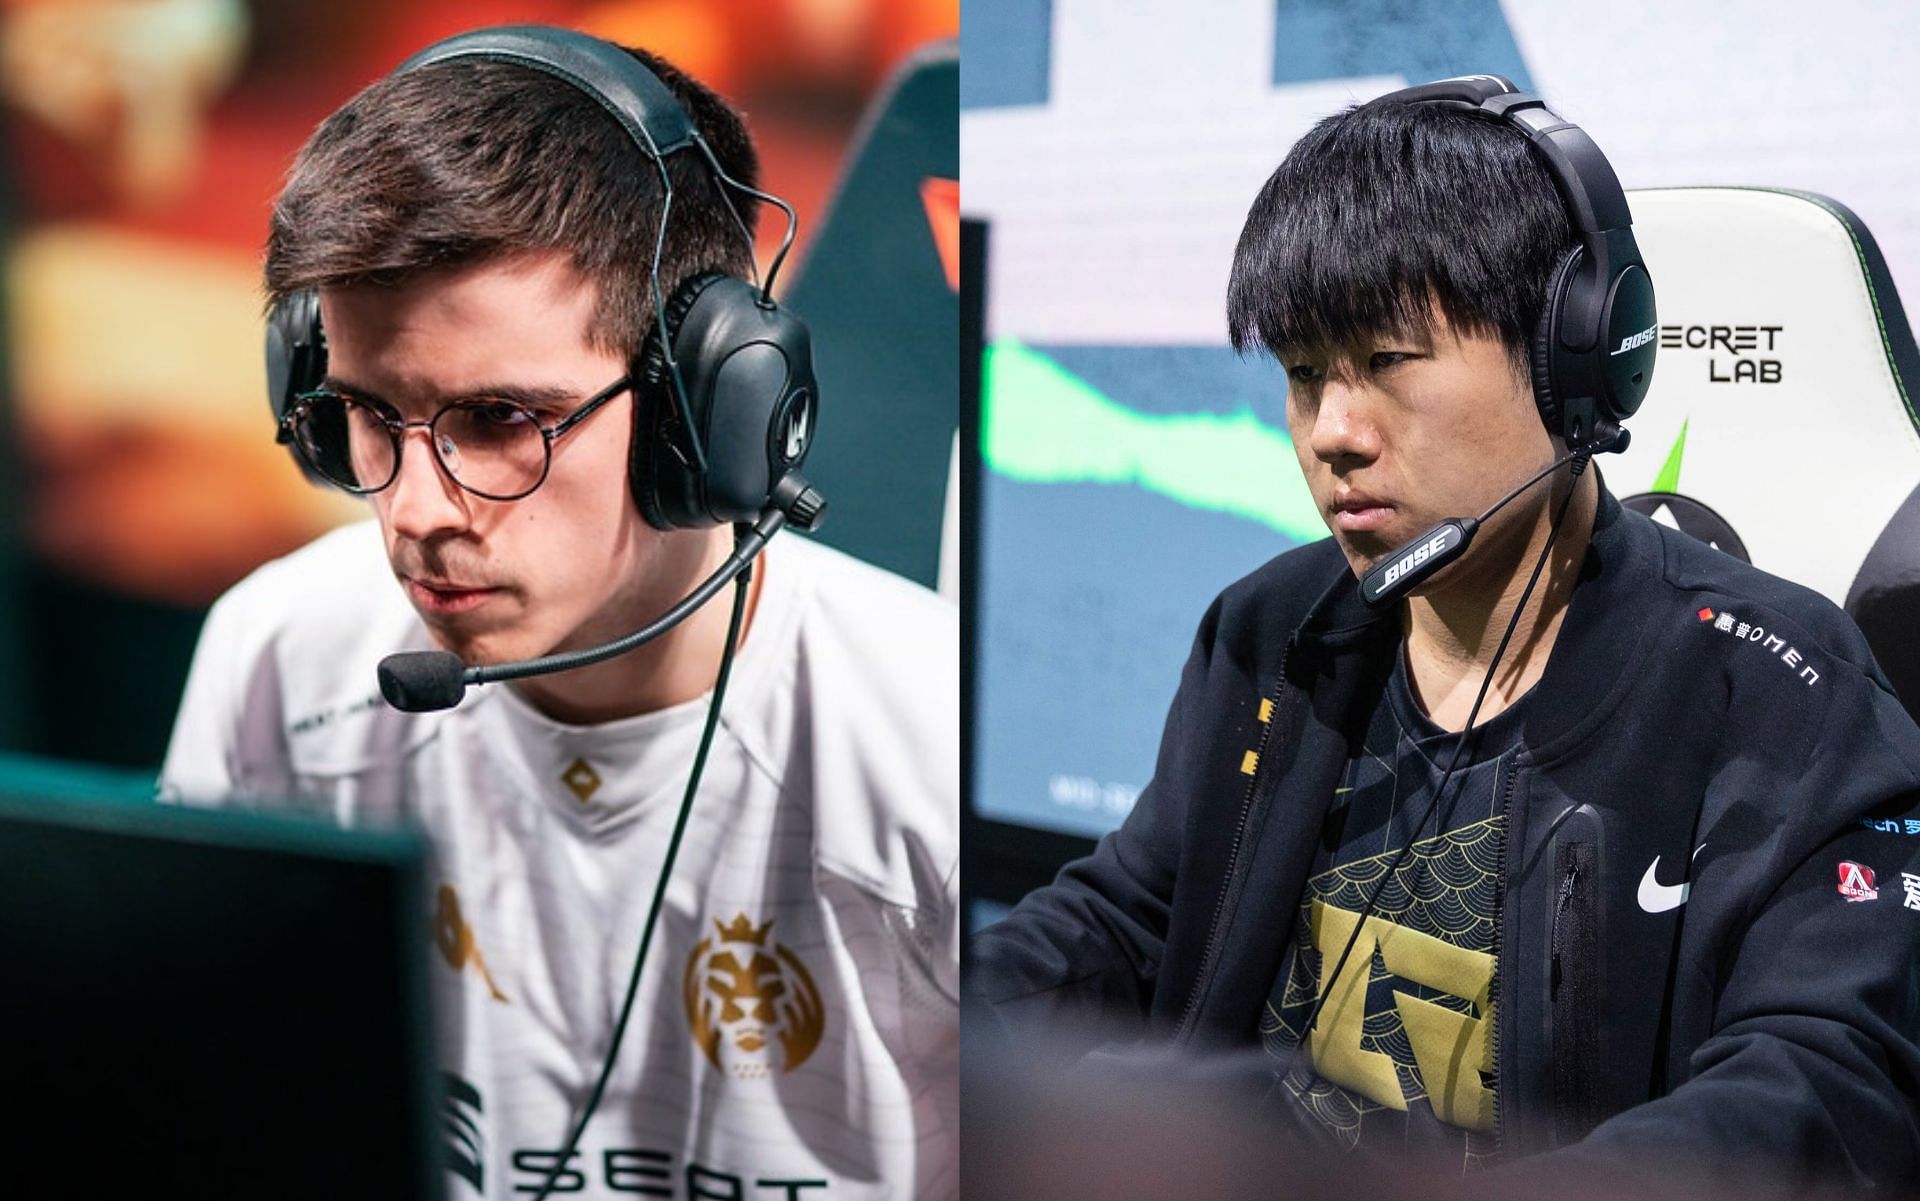 Gala and Elyoya will be the key players for their teams when the MAD Lions face RNG at Worlds 2022 (Image via Riot Games)